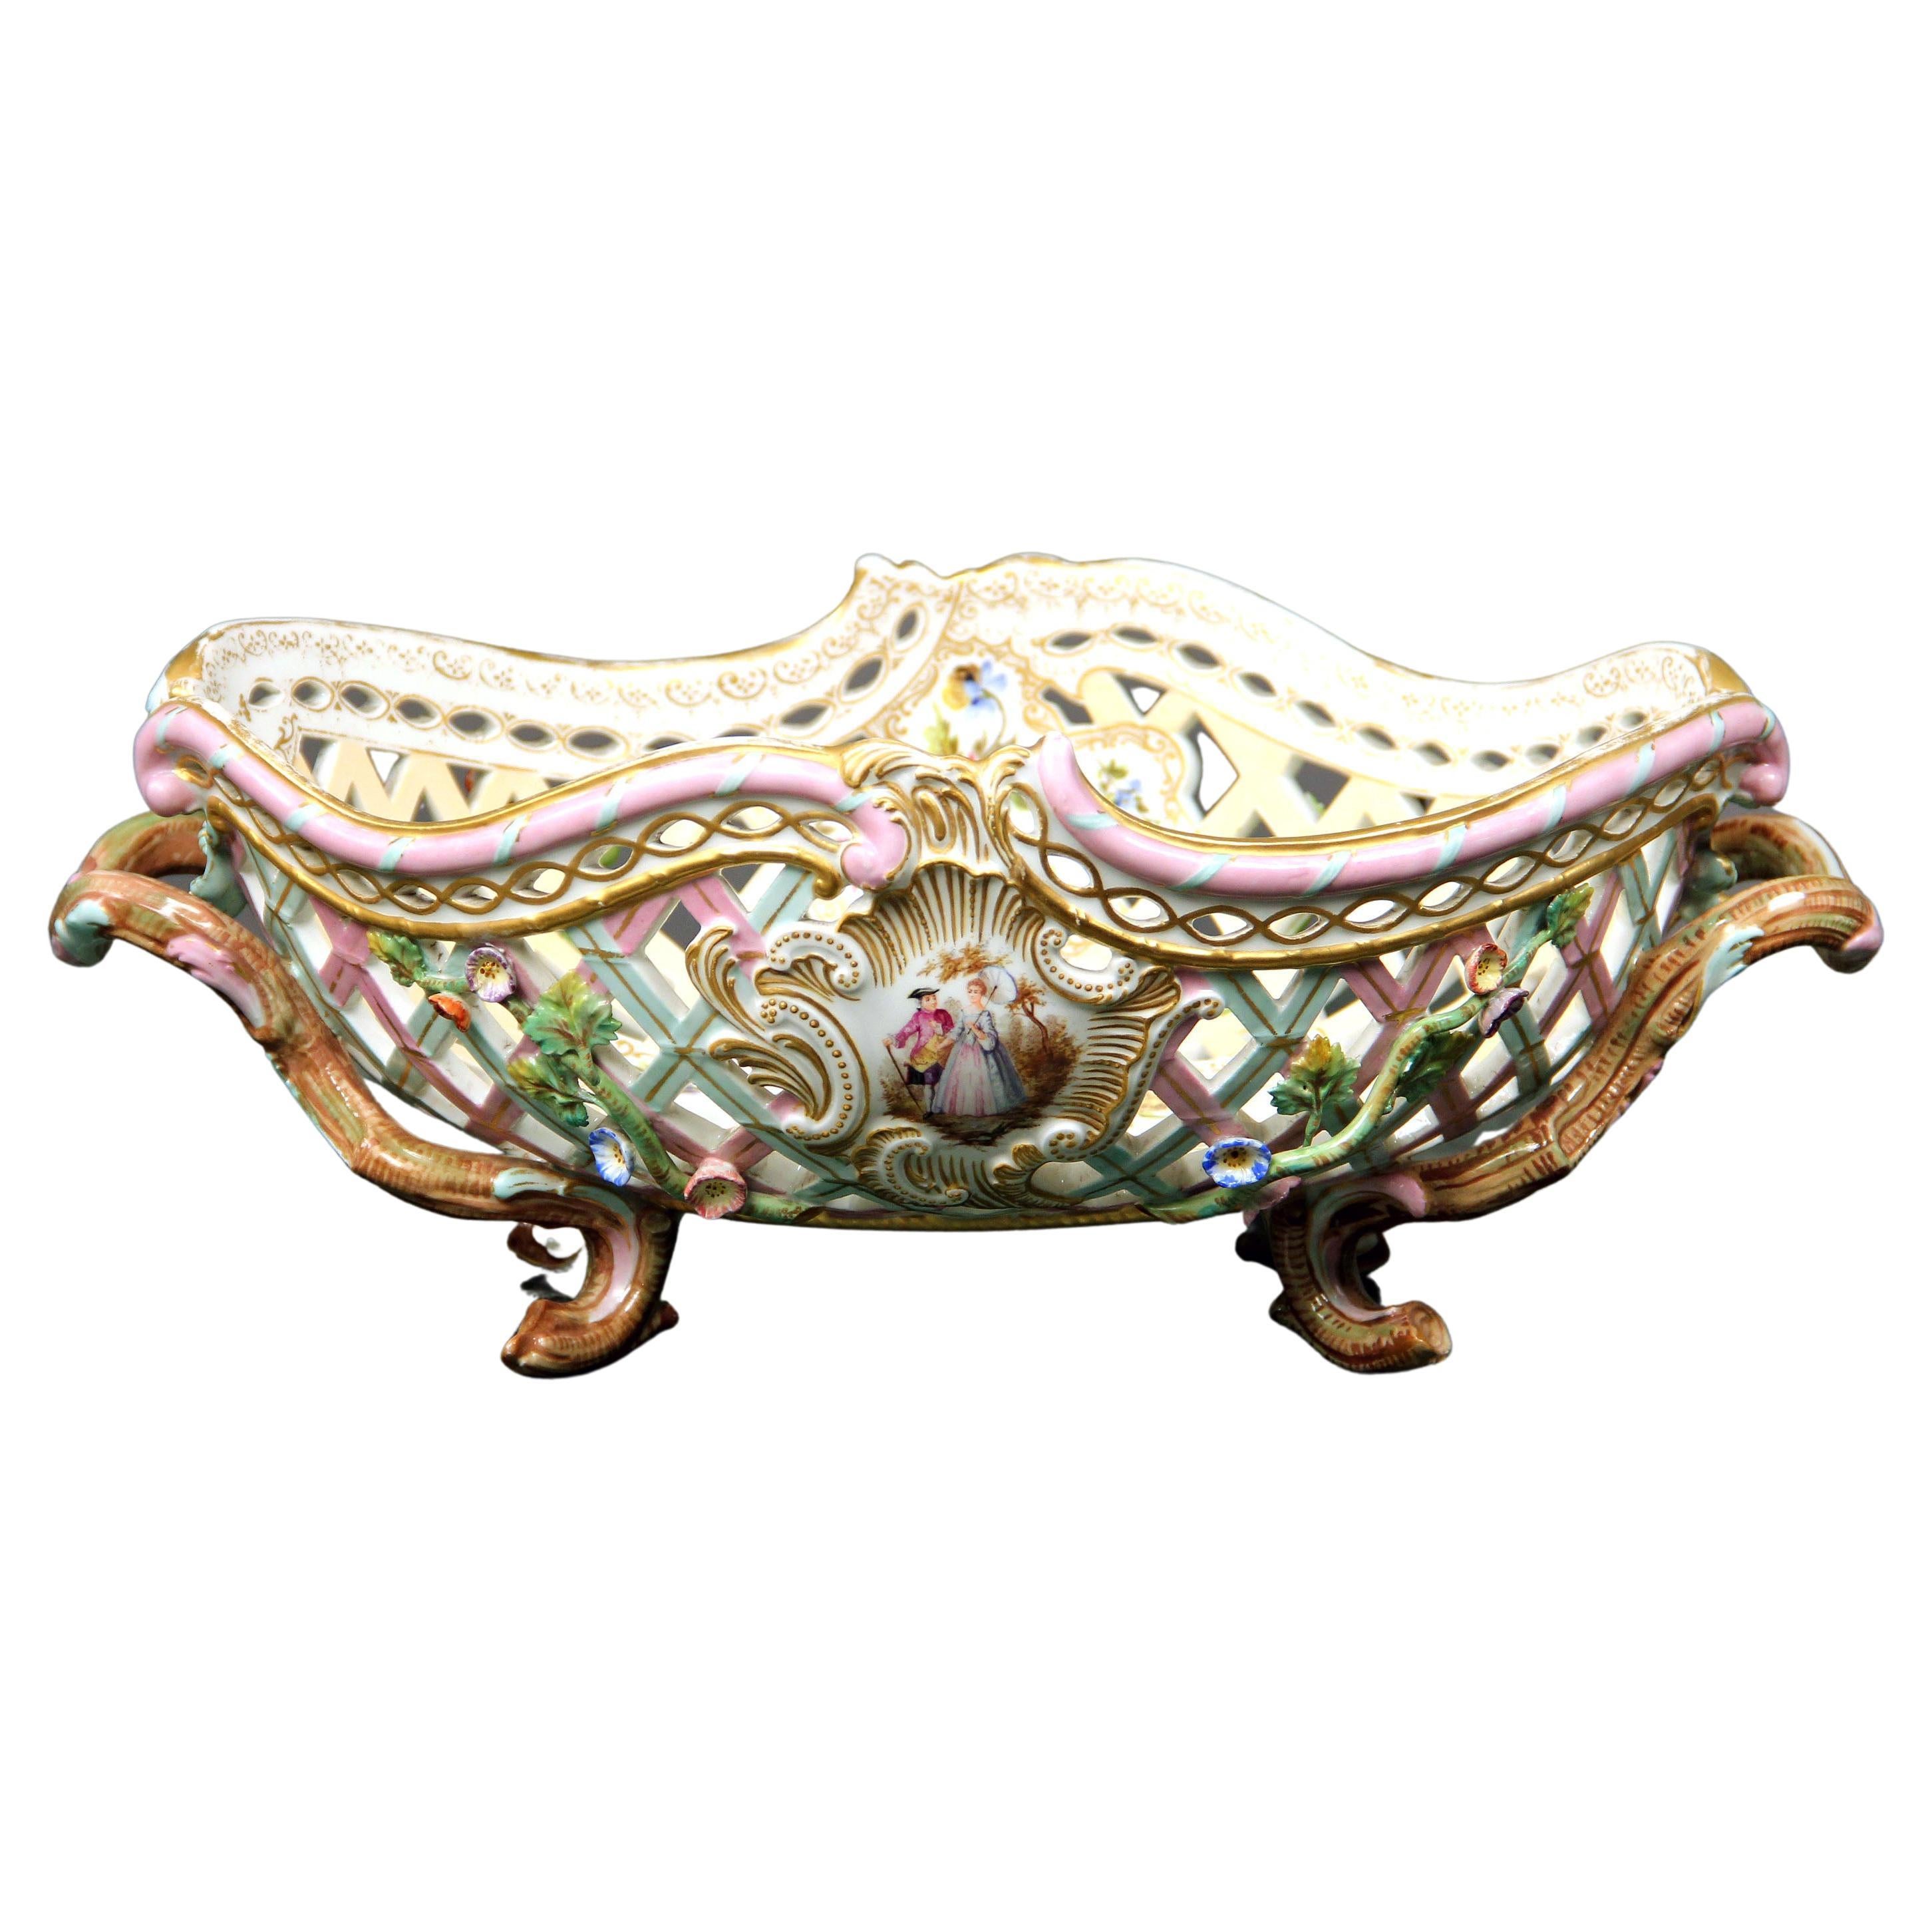 Late 19th/Early 20th Century Reticulated German K.P.M. Porcelain Centerpiece For Sale